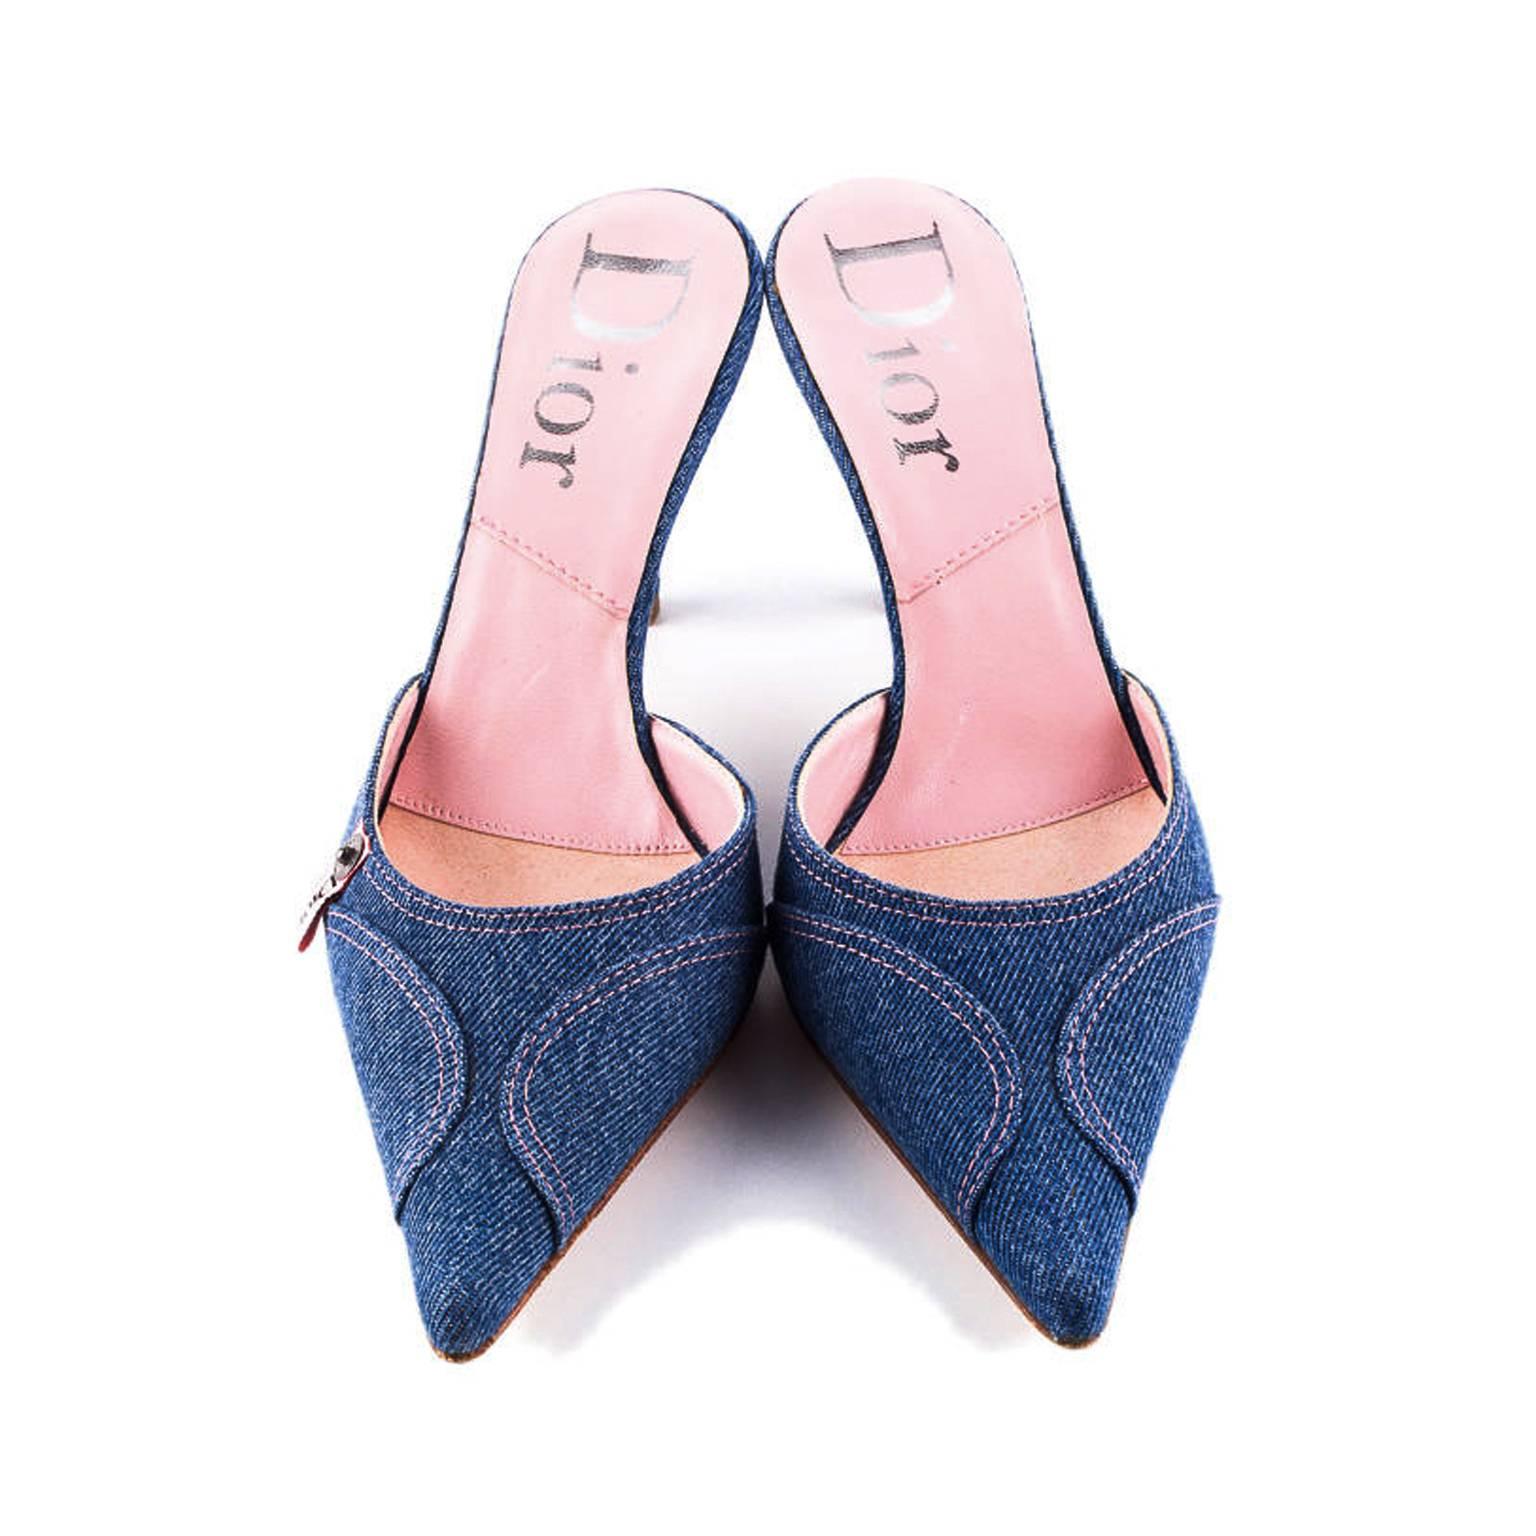 Blue Denim Mules by Christian Dior from the early 2000's, John Galliano era. This slip-in style features pink stitching throughout, logo tab at topline and a 3